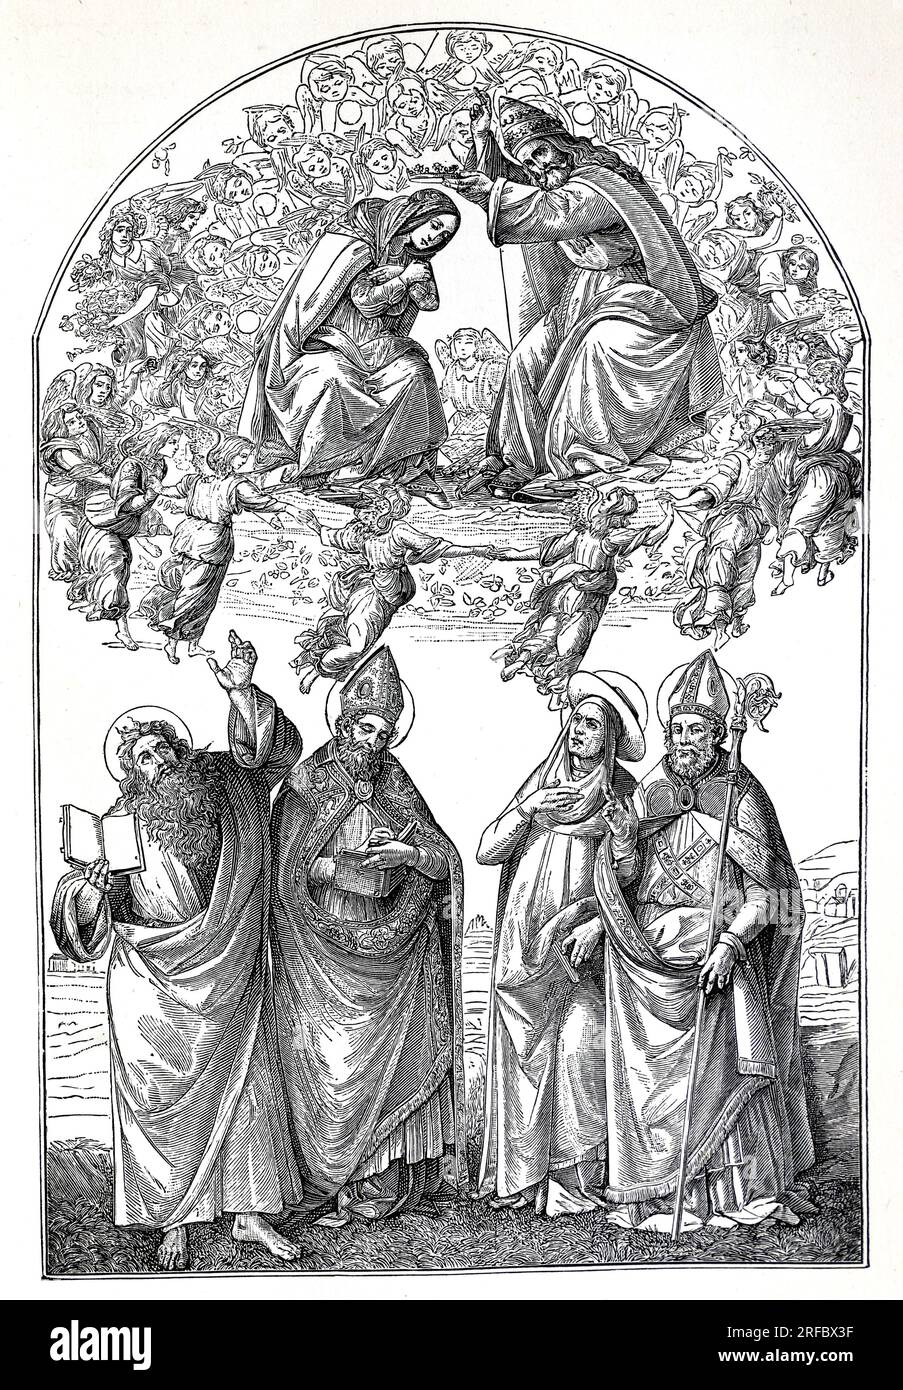 The Virgin Mary Crowned by the Father Eternal from a painting by Boticelli, published in The Lives of the Saints by Sabin Baring-Gould. Stock Photo